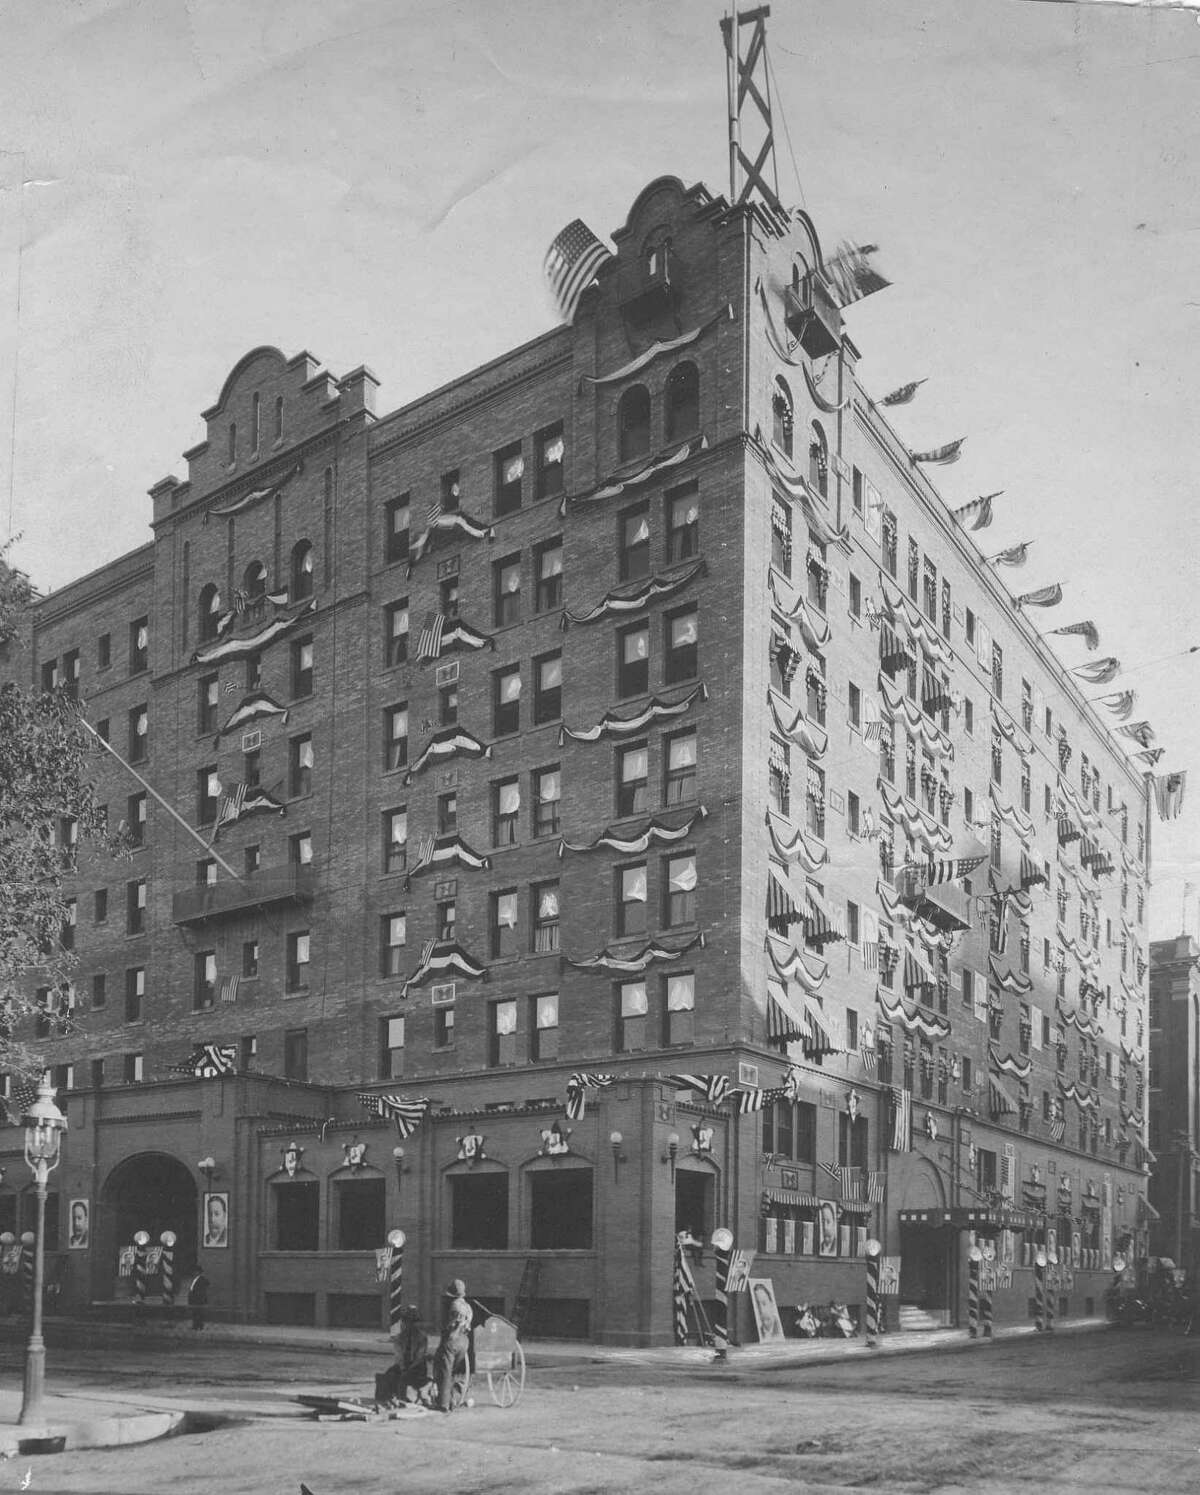 The St. Anthony Hotel is shown decked out in flags, bunting and pictures of President William Howard Taft in celebration of his visit to San Antonio on Oct 17, 1909. Taft stayed at the hotel.